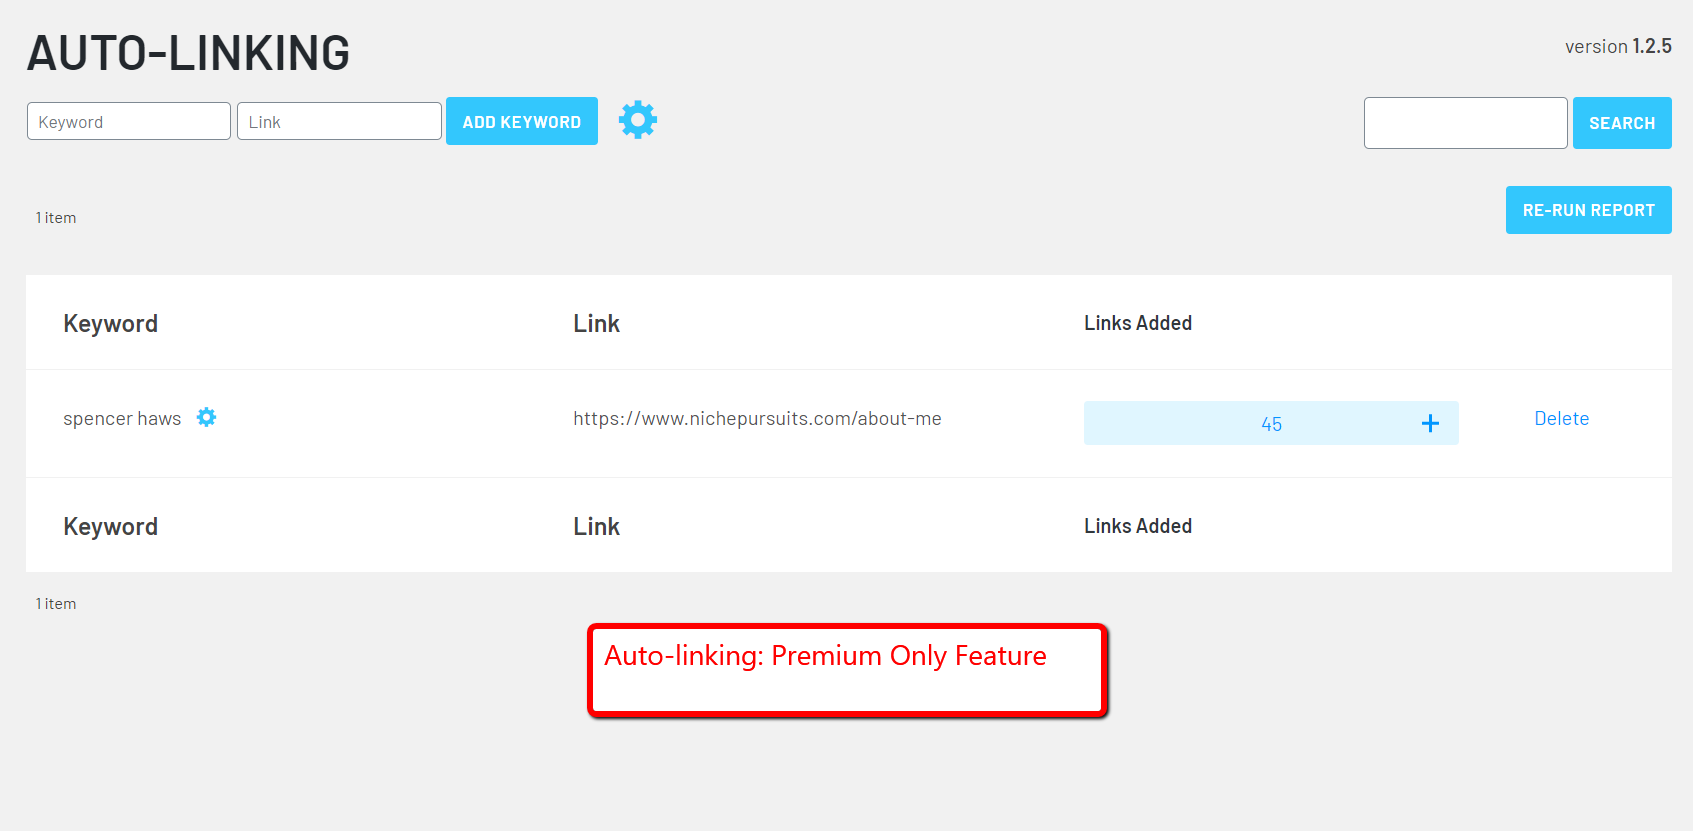 [Premium] The Auto-Linking feature does the work for you! Just enter the keywords that you want to make links, input the destination URL, and let Link Whisper Premium build the links!